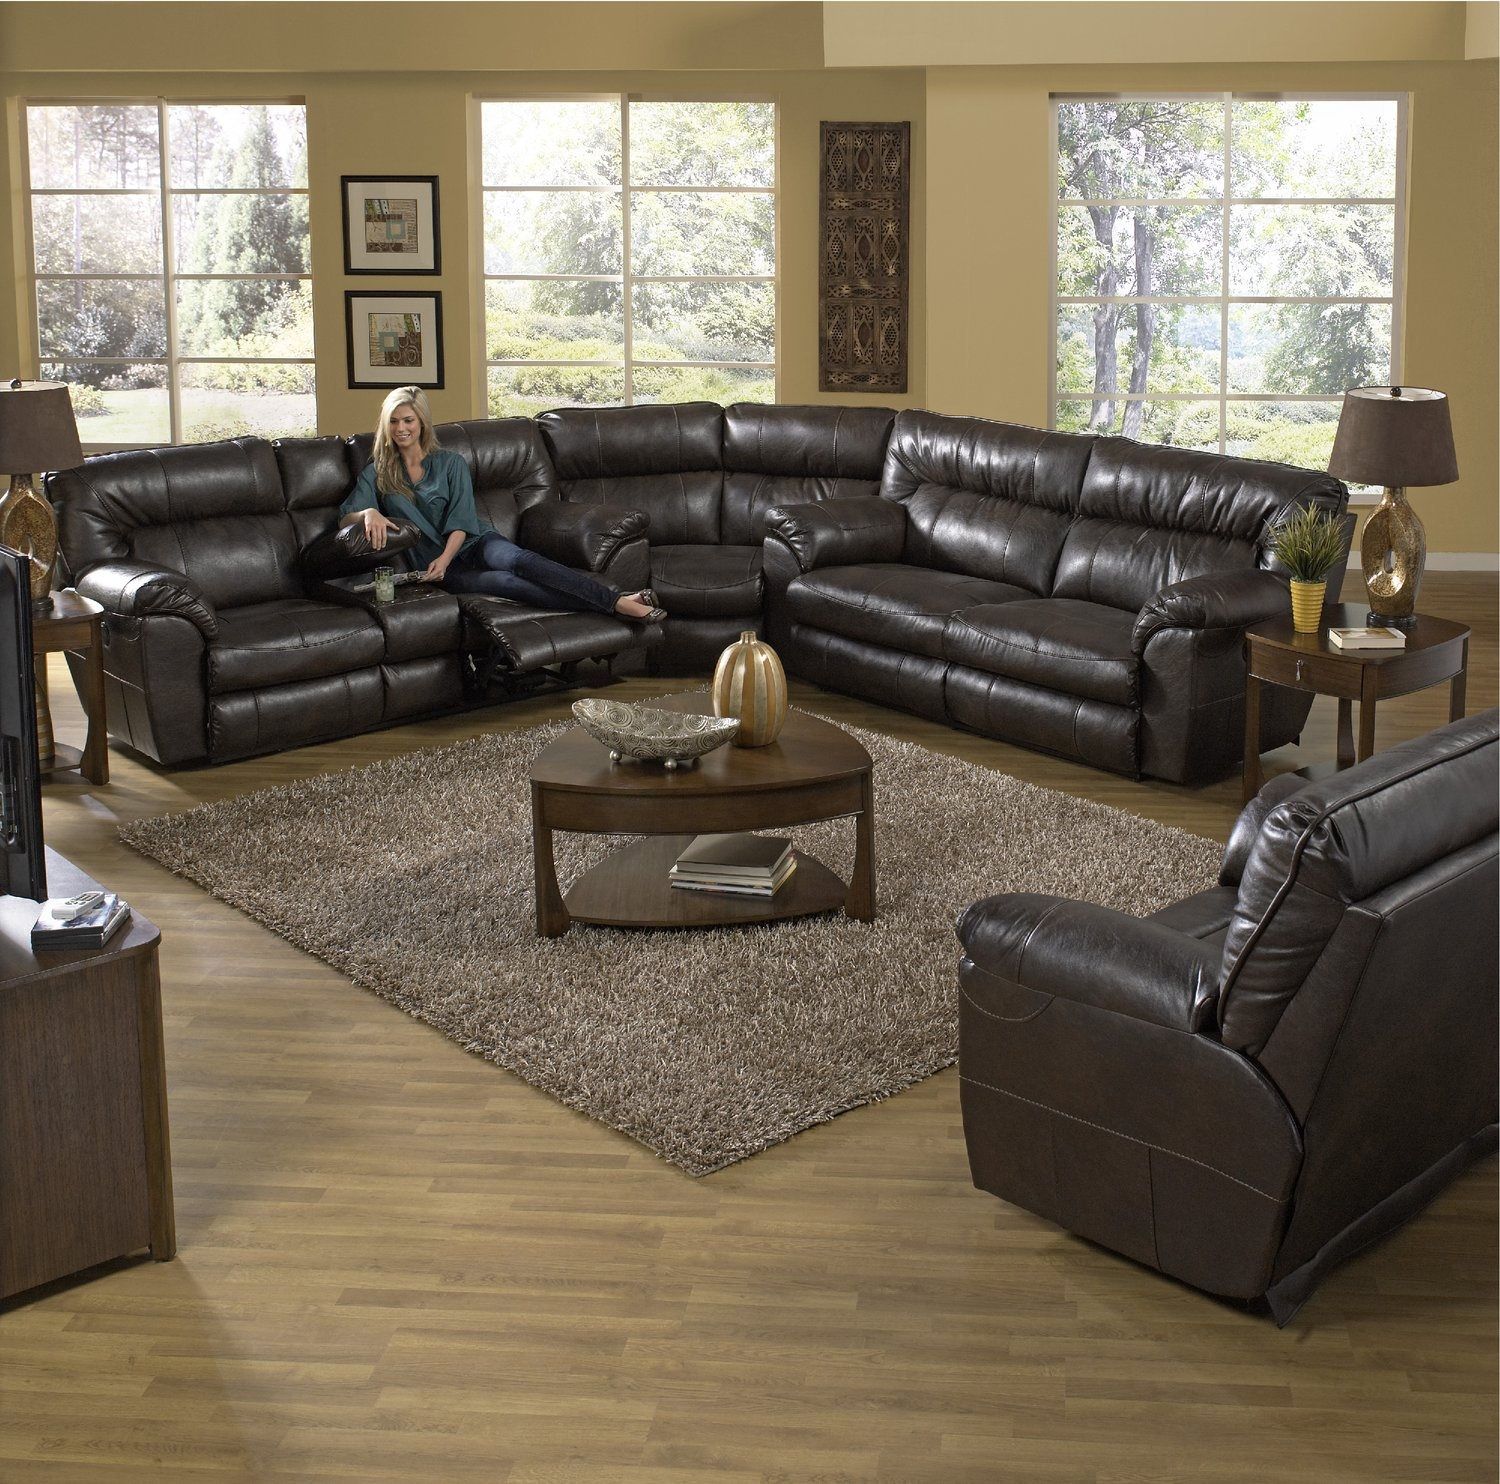 Ryan 3 Piece Reclining Sectional | Hom Furniture With Duluth Mn Sectional Sofas (View 3 of 10)